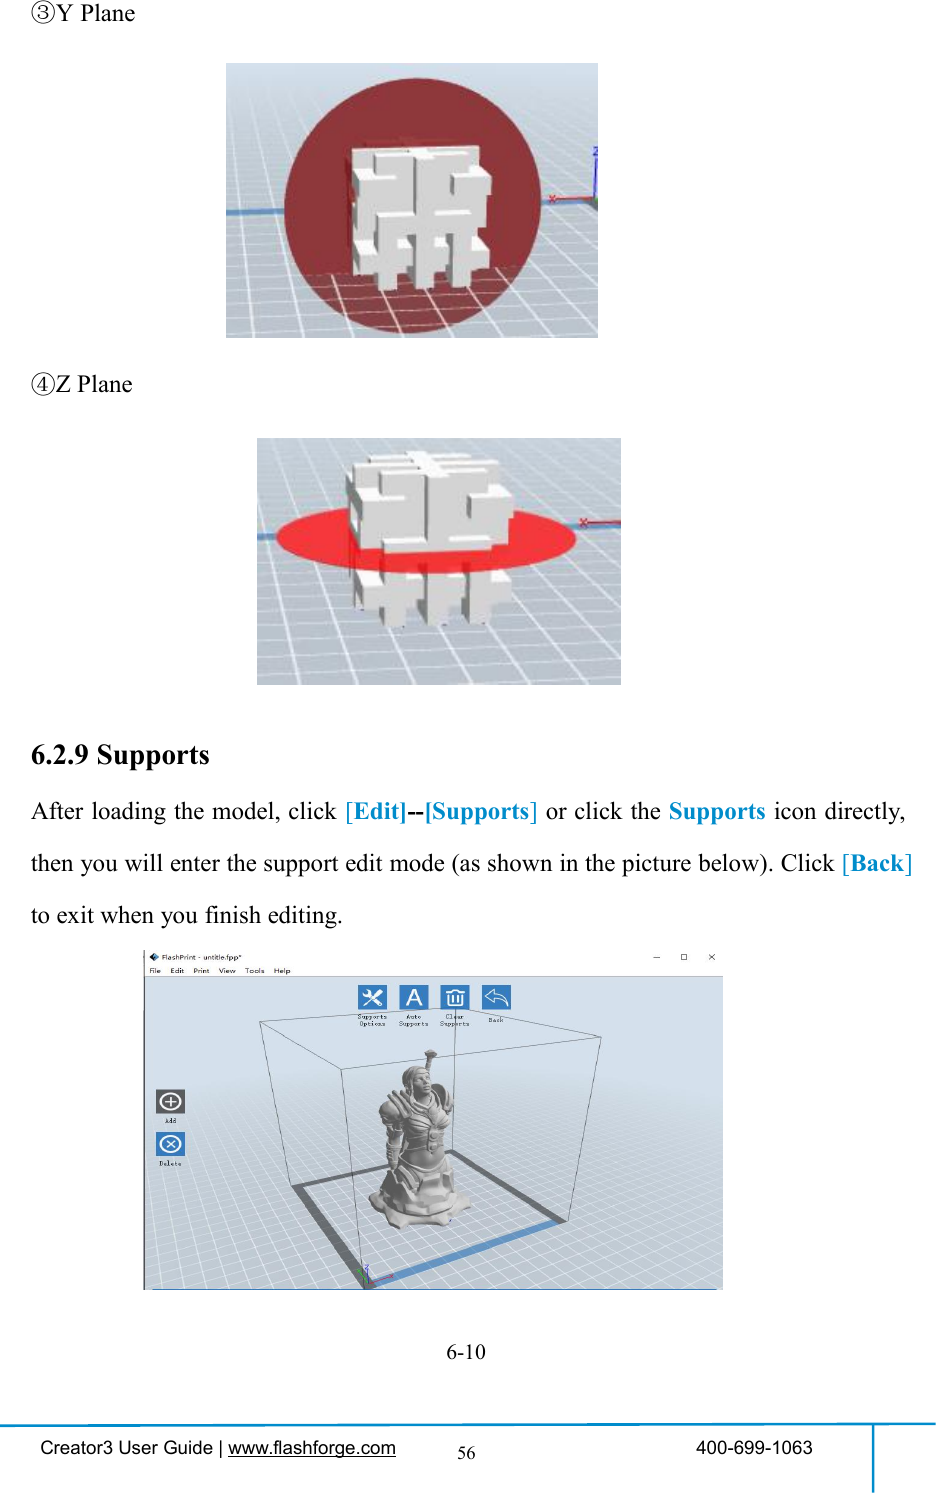 Creator3 User Guide | www.flashforge.com 400-699-106356③Y Plane④Z Plane6.2.9 SupportsAfter loading the model, click [Edit]--[Supports]or click the Supports icon directly,then you will enter the support edit mode (as shown in the picture below). Click [Back]to exit when you finish editing.6-10